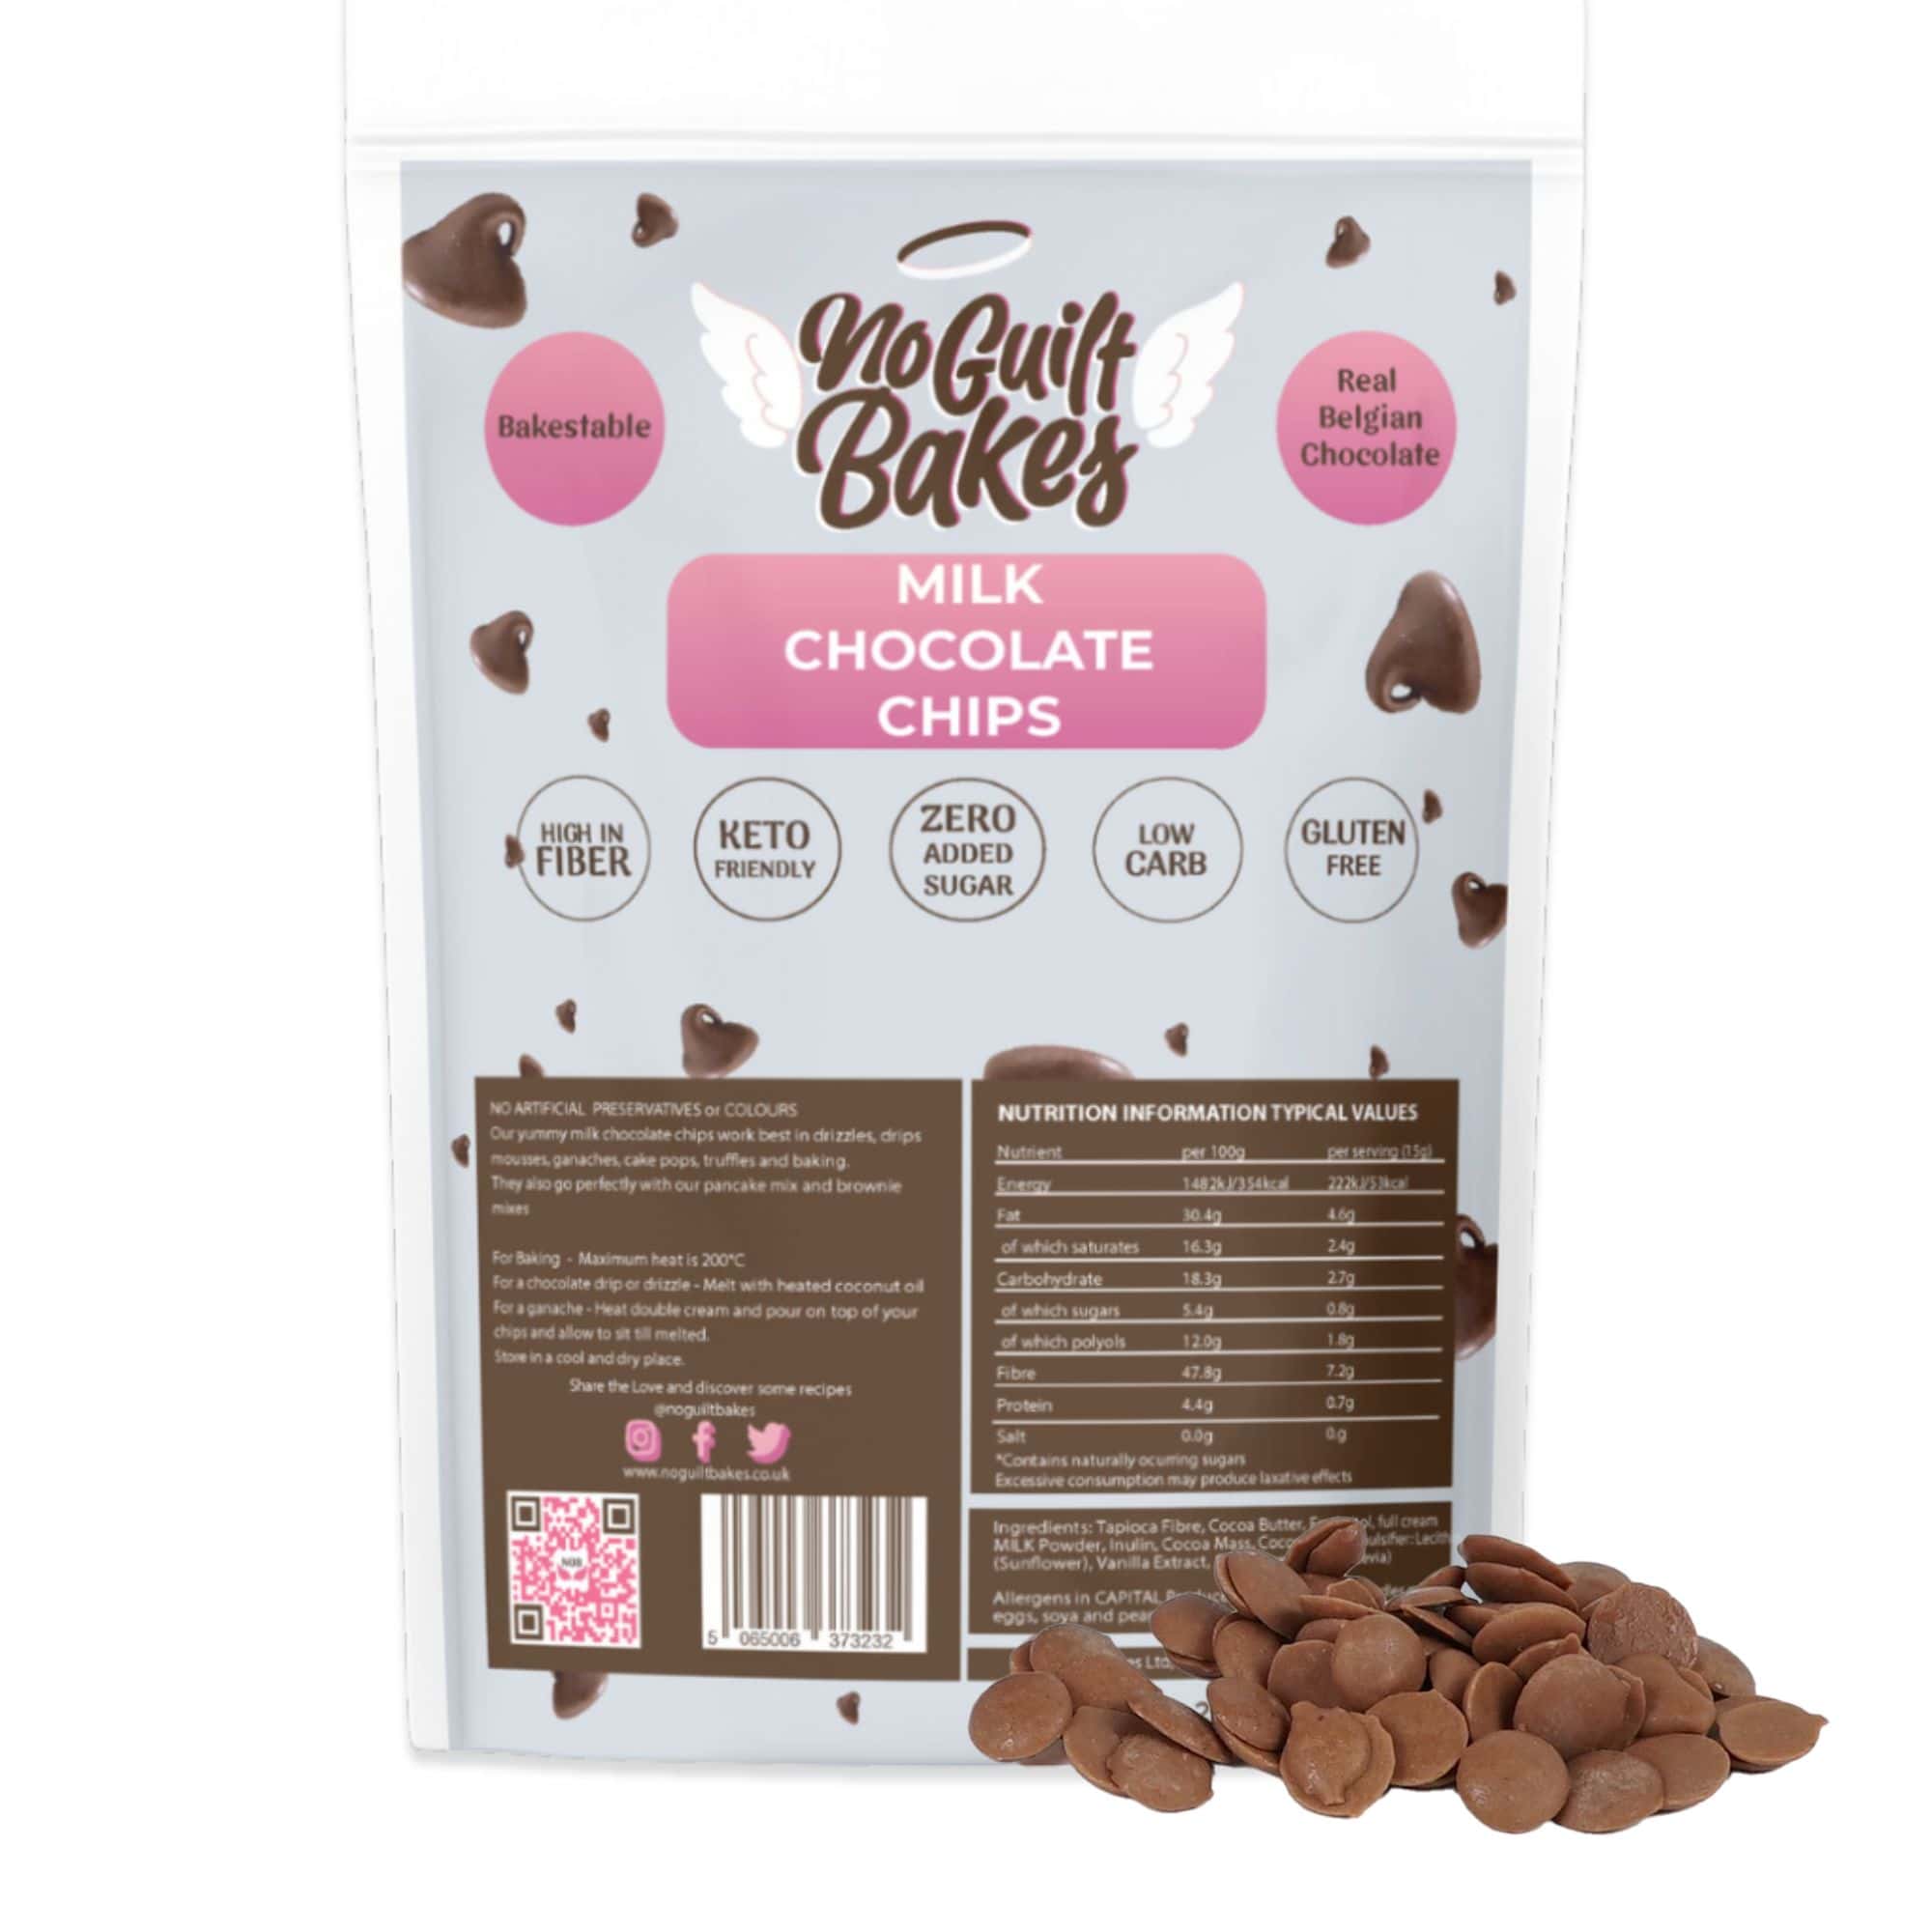 A bake-stable bag of No Guilt Bakes Belgian Milk Chocolate Chips on a white background.